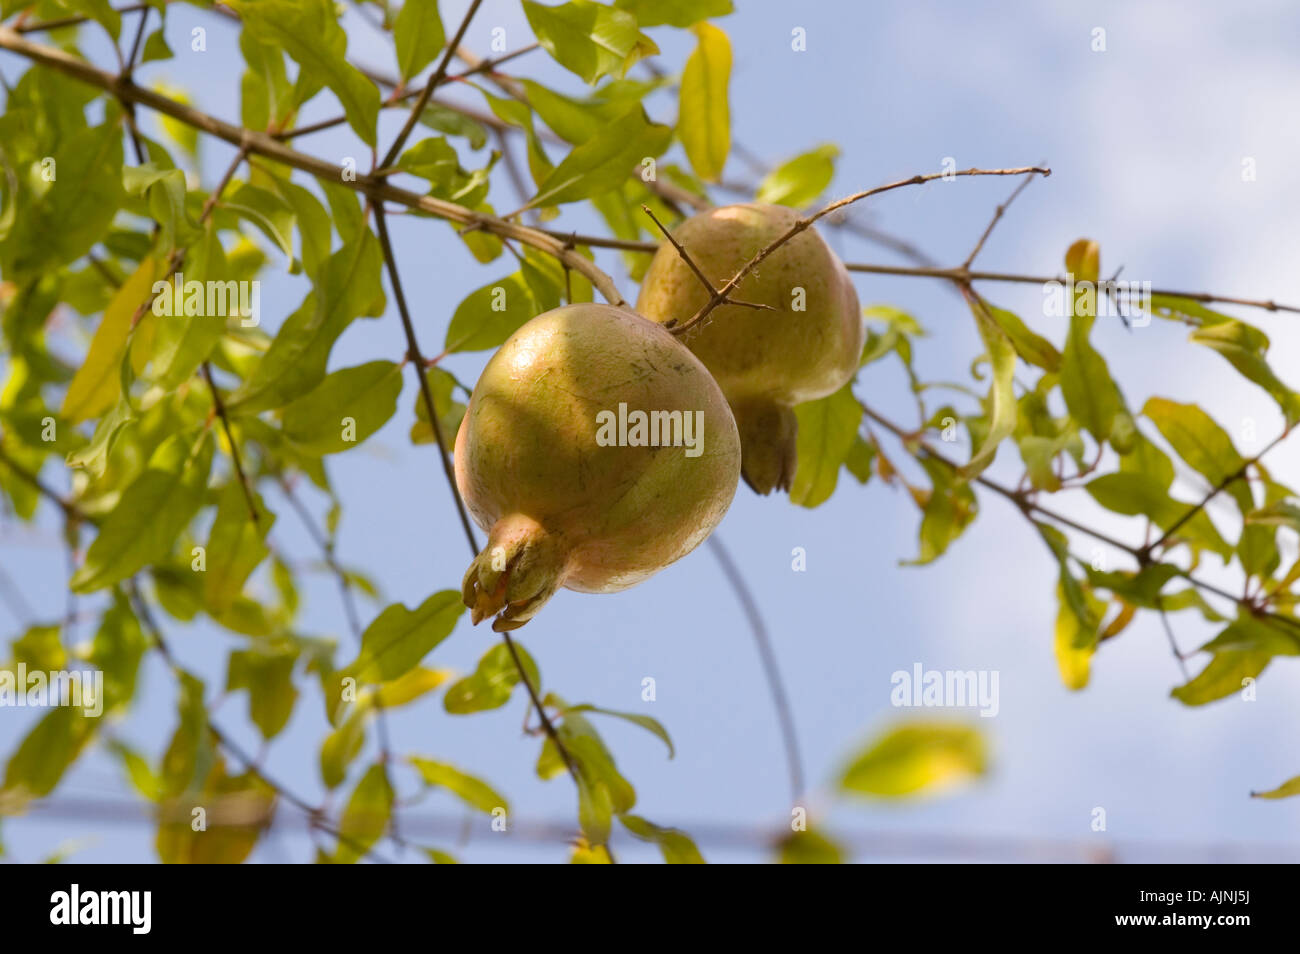 Pomegranate tree Punica granatum native to Asia cultivated for its fruit Stock Photo